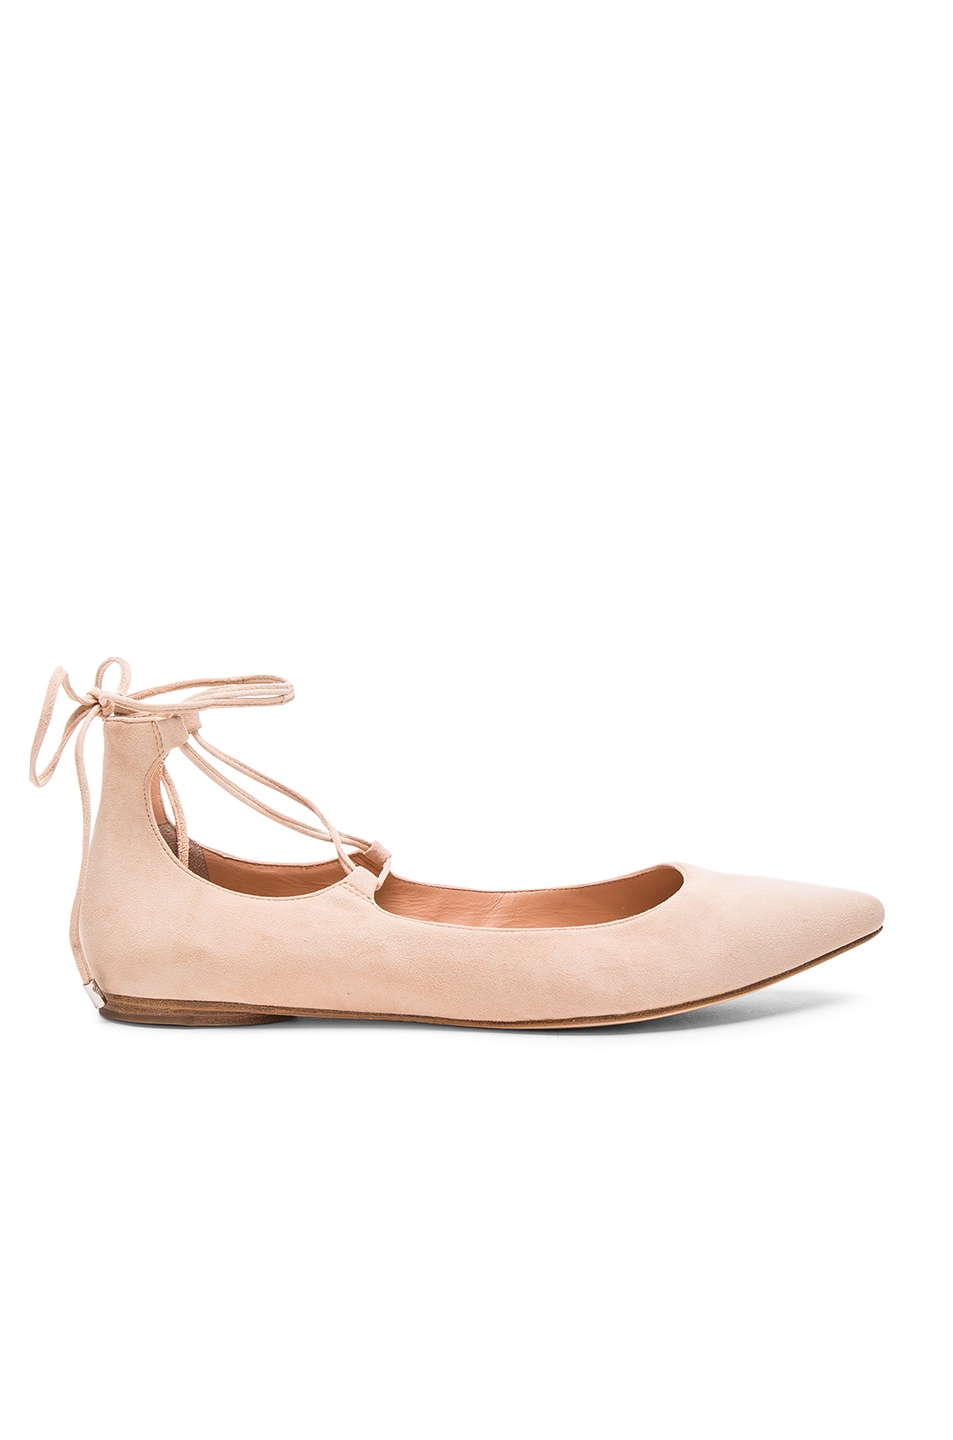 Image 1 of Sigerson Morrison Suede Sassy Flats in Blush